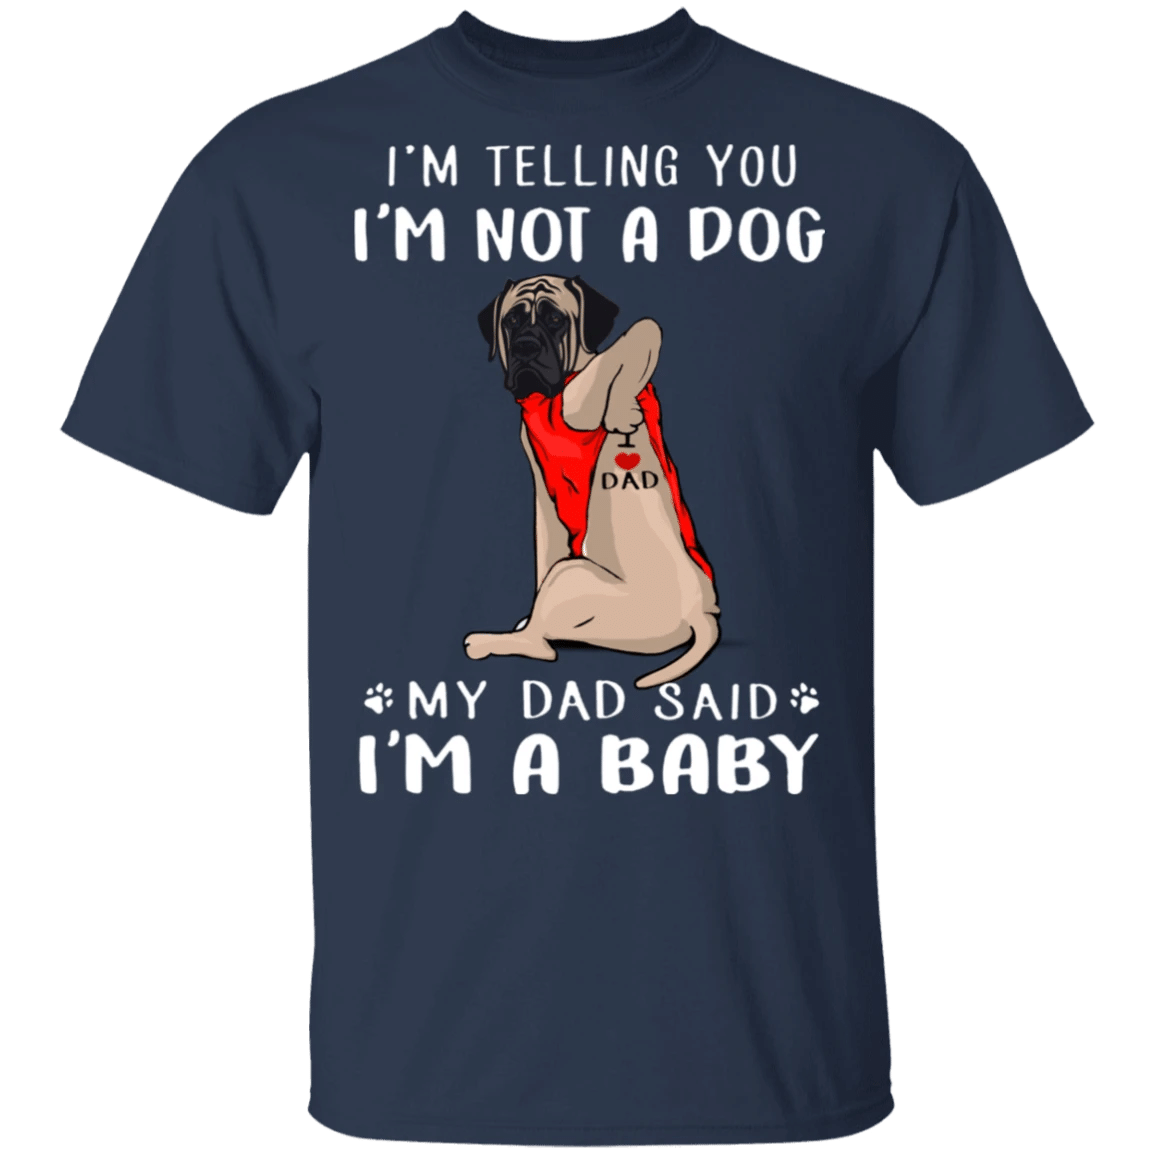 Mastiff I'm Telling You I'm Not a Dog T-Shirt Tattoos I Love Dad, Fathers Day Gifts From Son